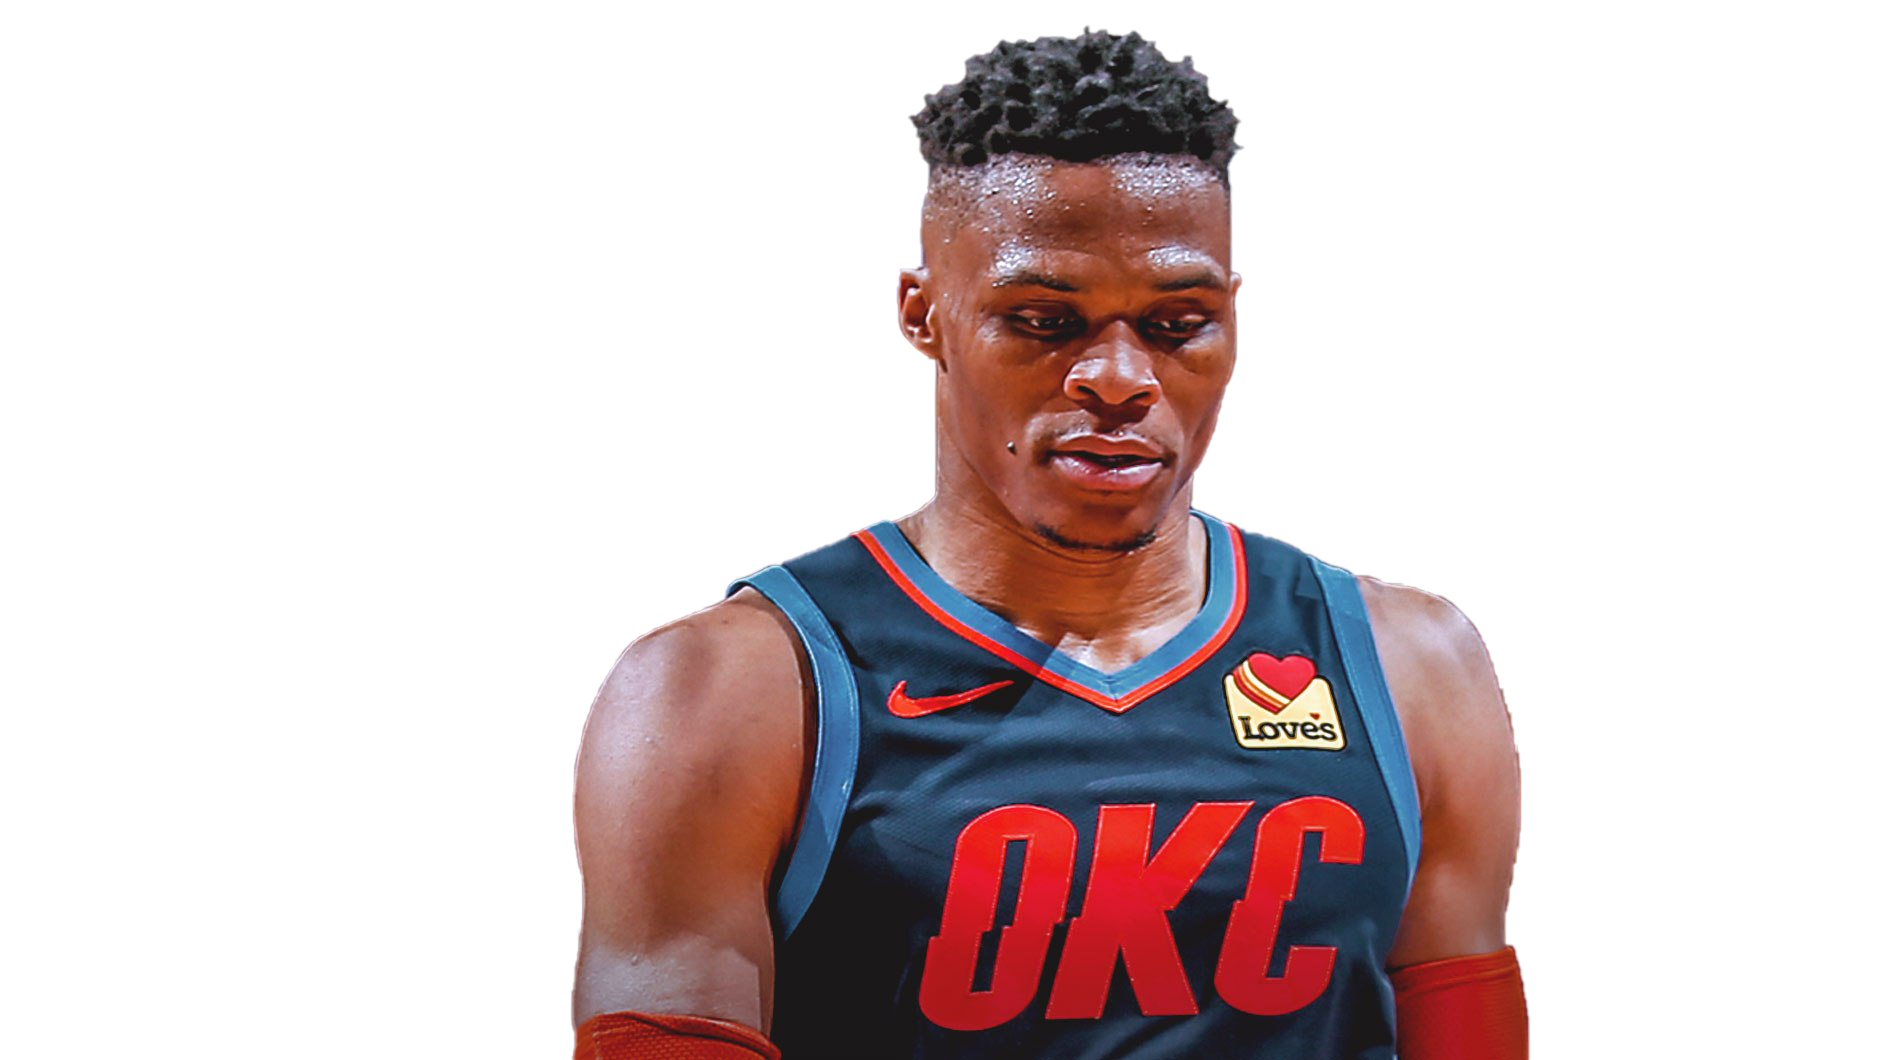 Russell westbrook PNG image